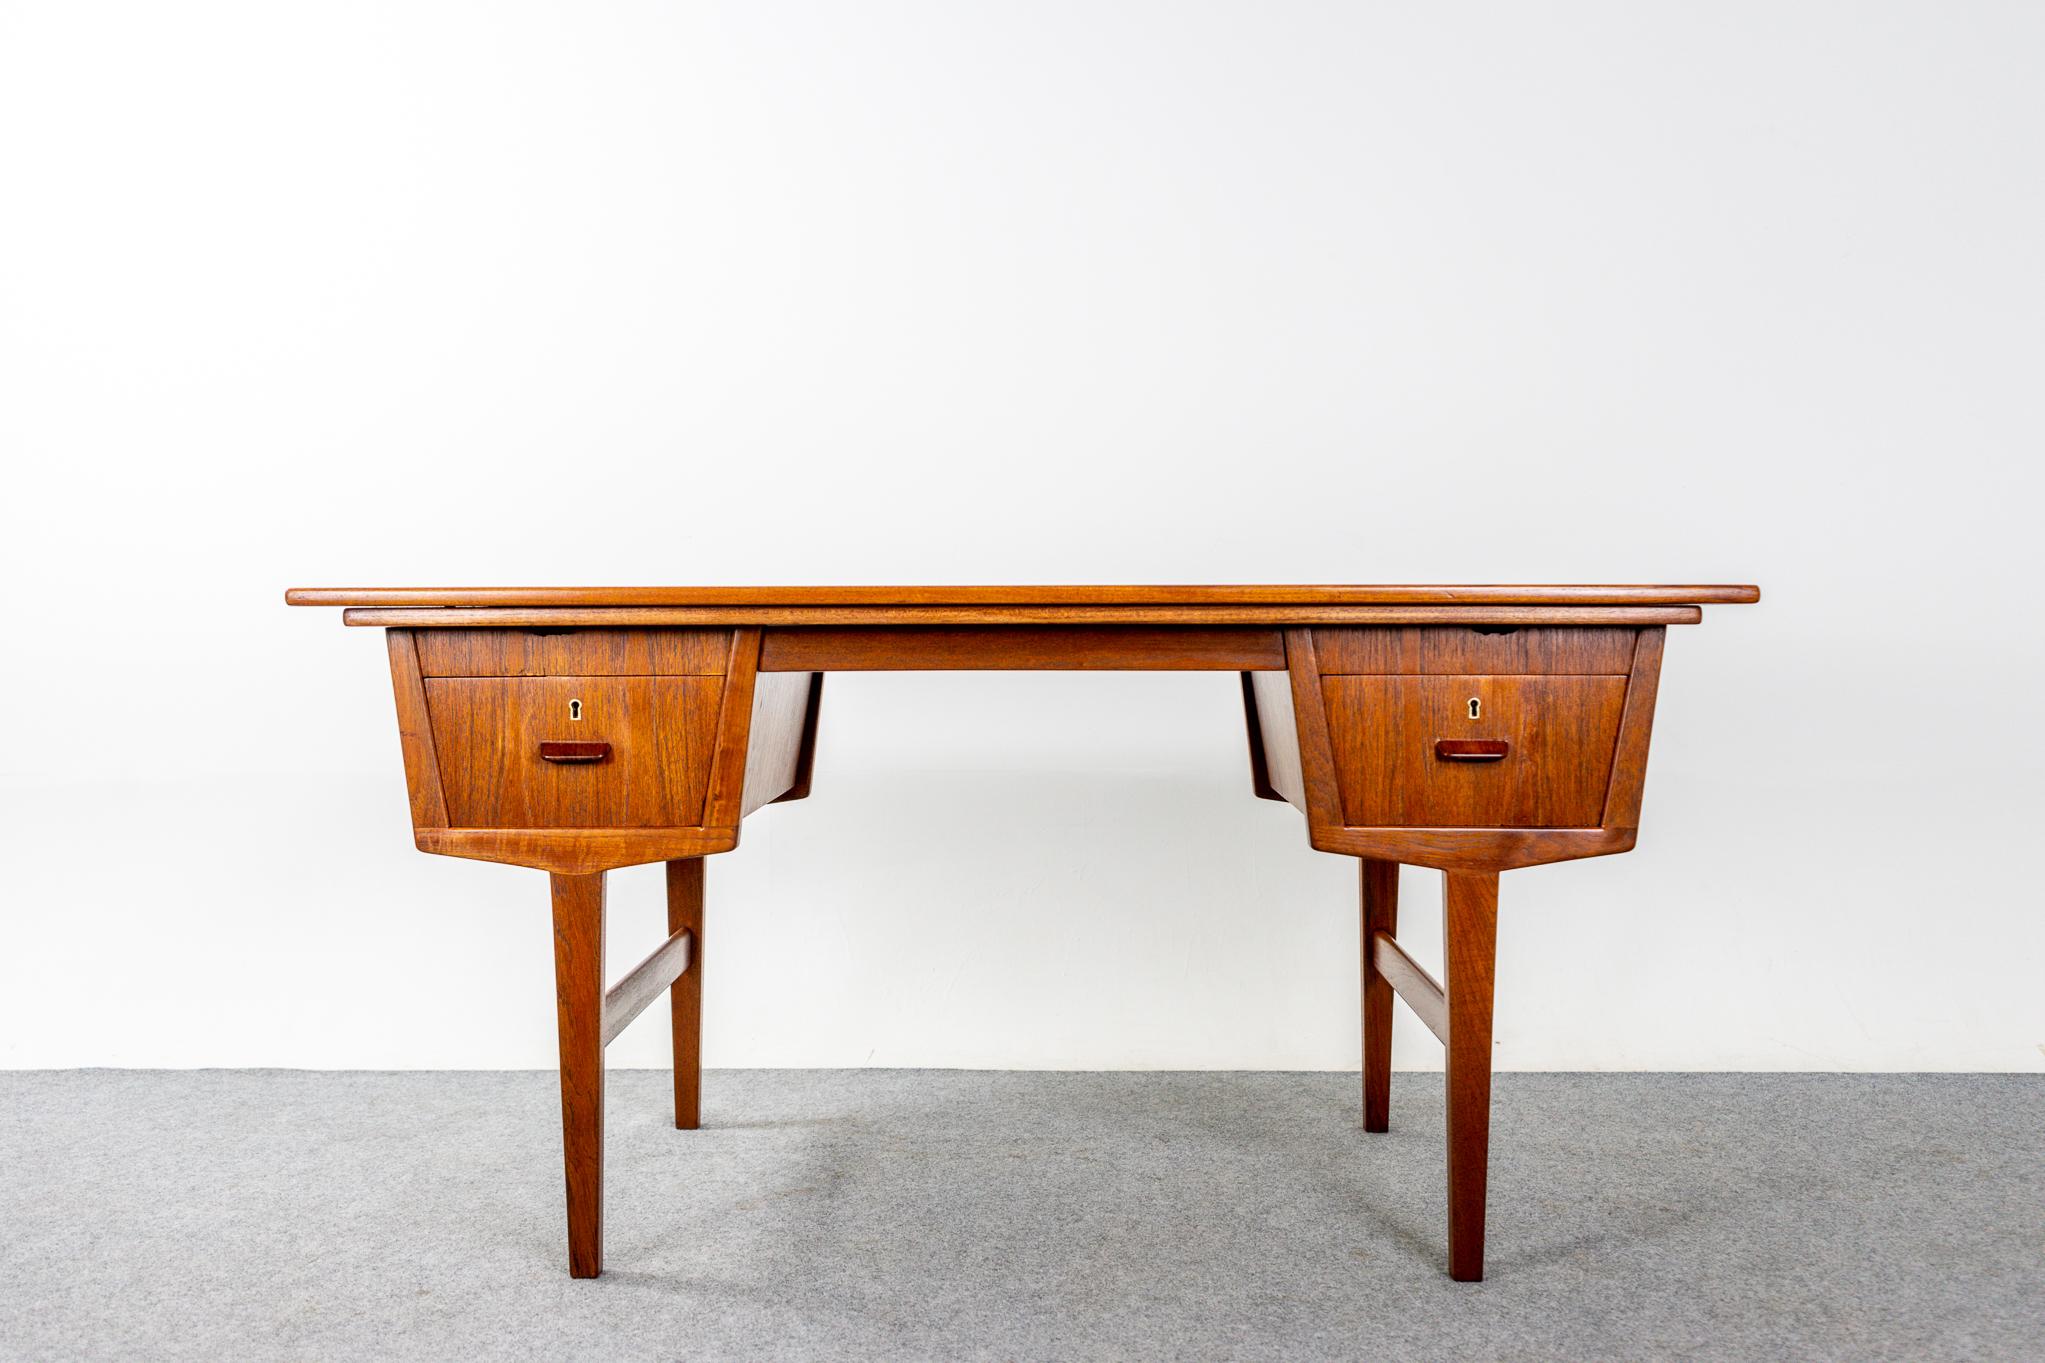 Teak Danish partner desk, circa 1960's. Double trouble. Metamorphic partner desk has two draw leaves that expand to create a large work area. Unique design has duals workstations, allowing users to face each other. Front and back of desk are